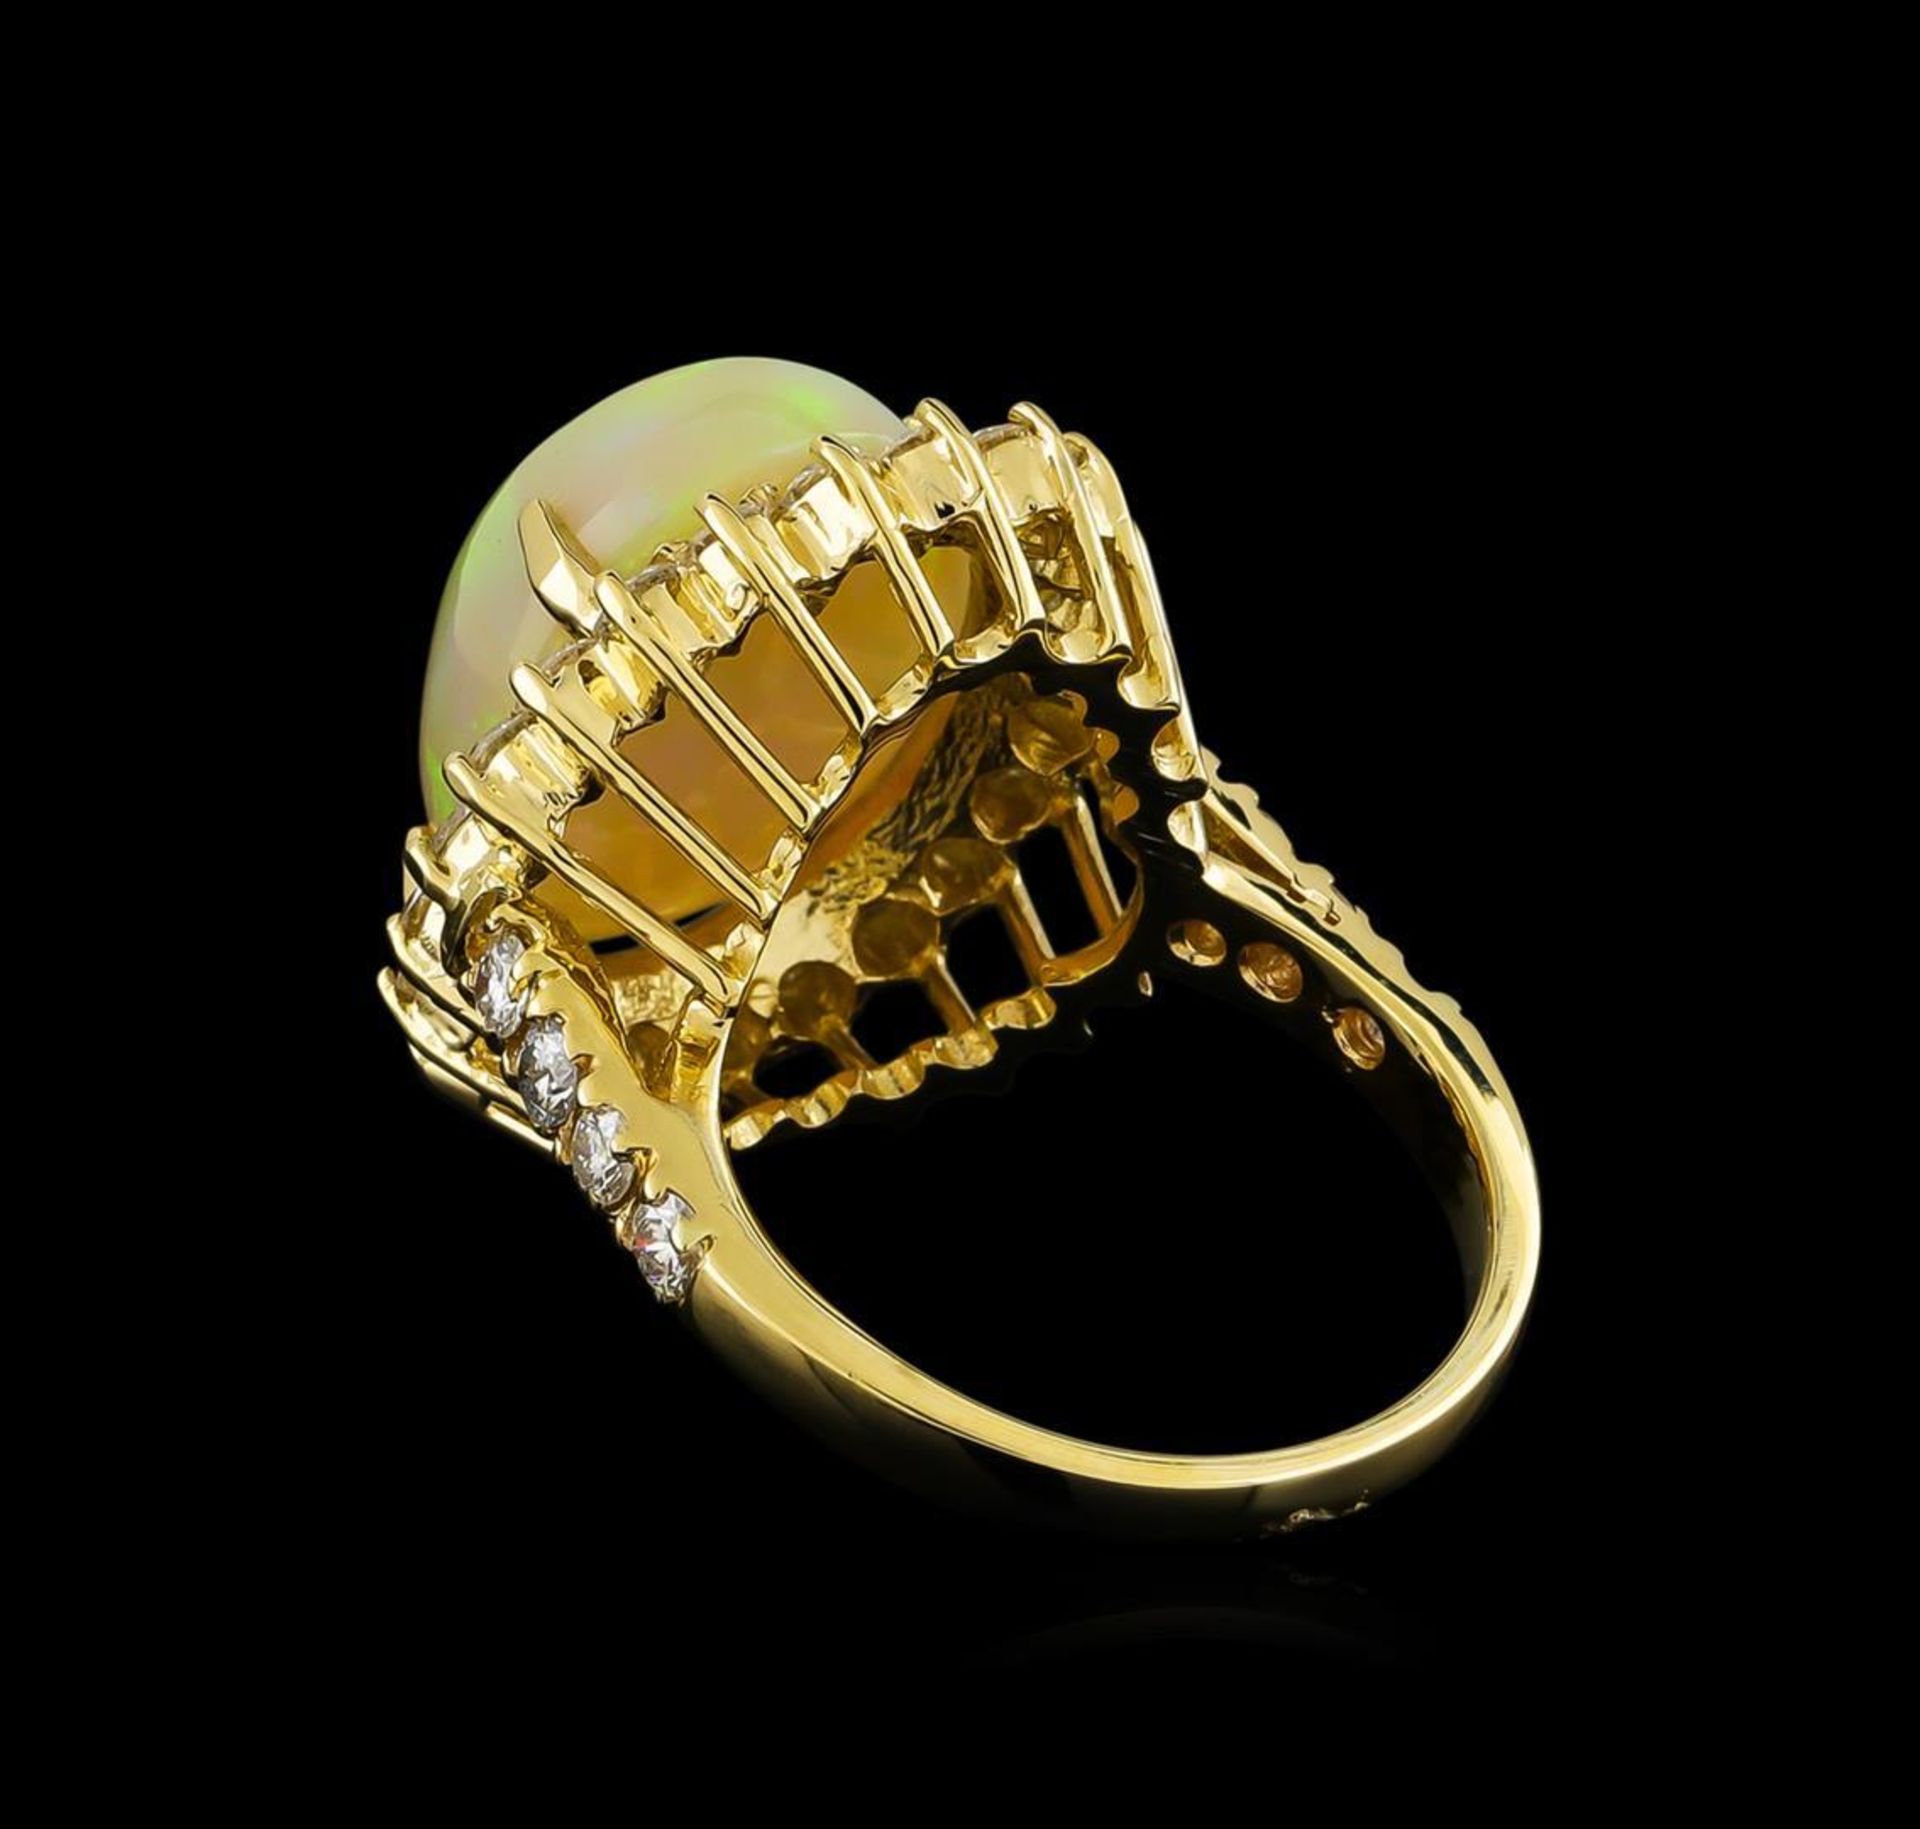 11.30 ctw Opal and Diamond Ring - 14KT Yellow Gold - Image 3 of 5